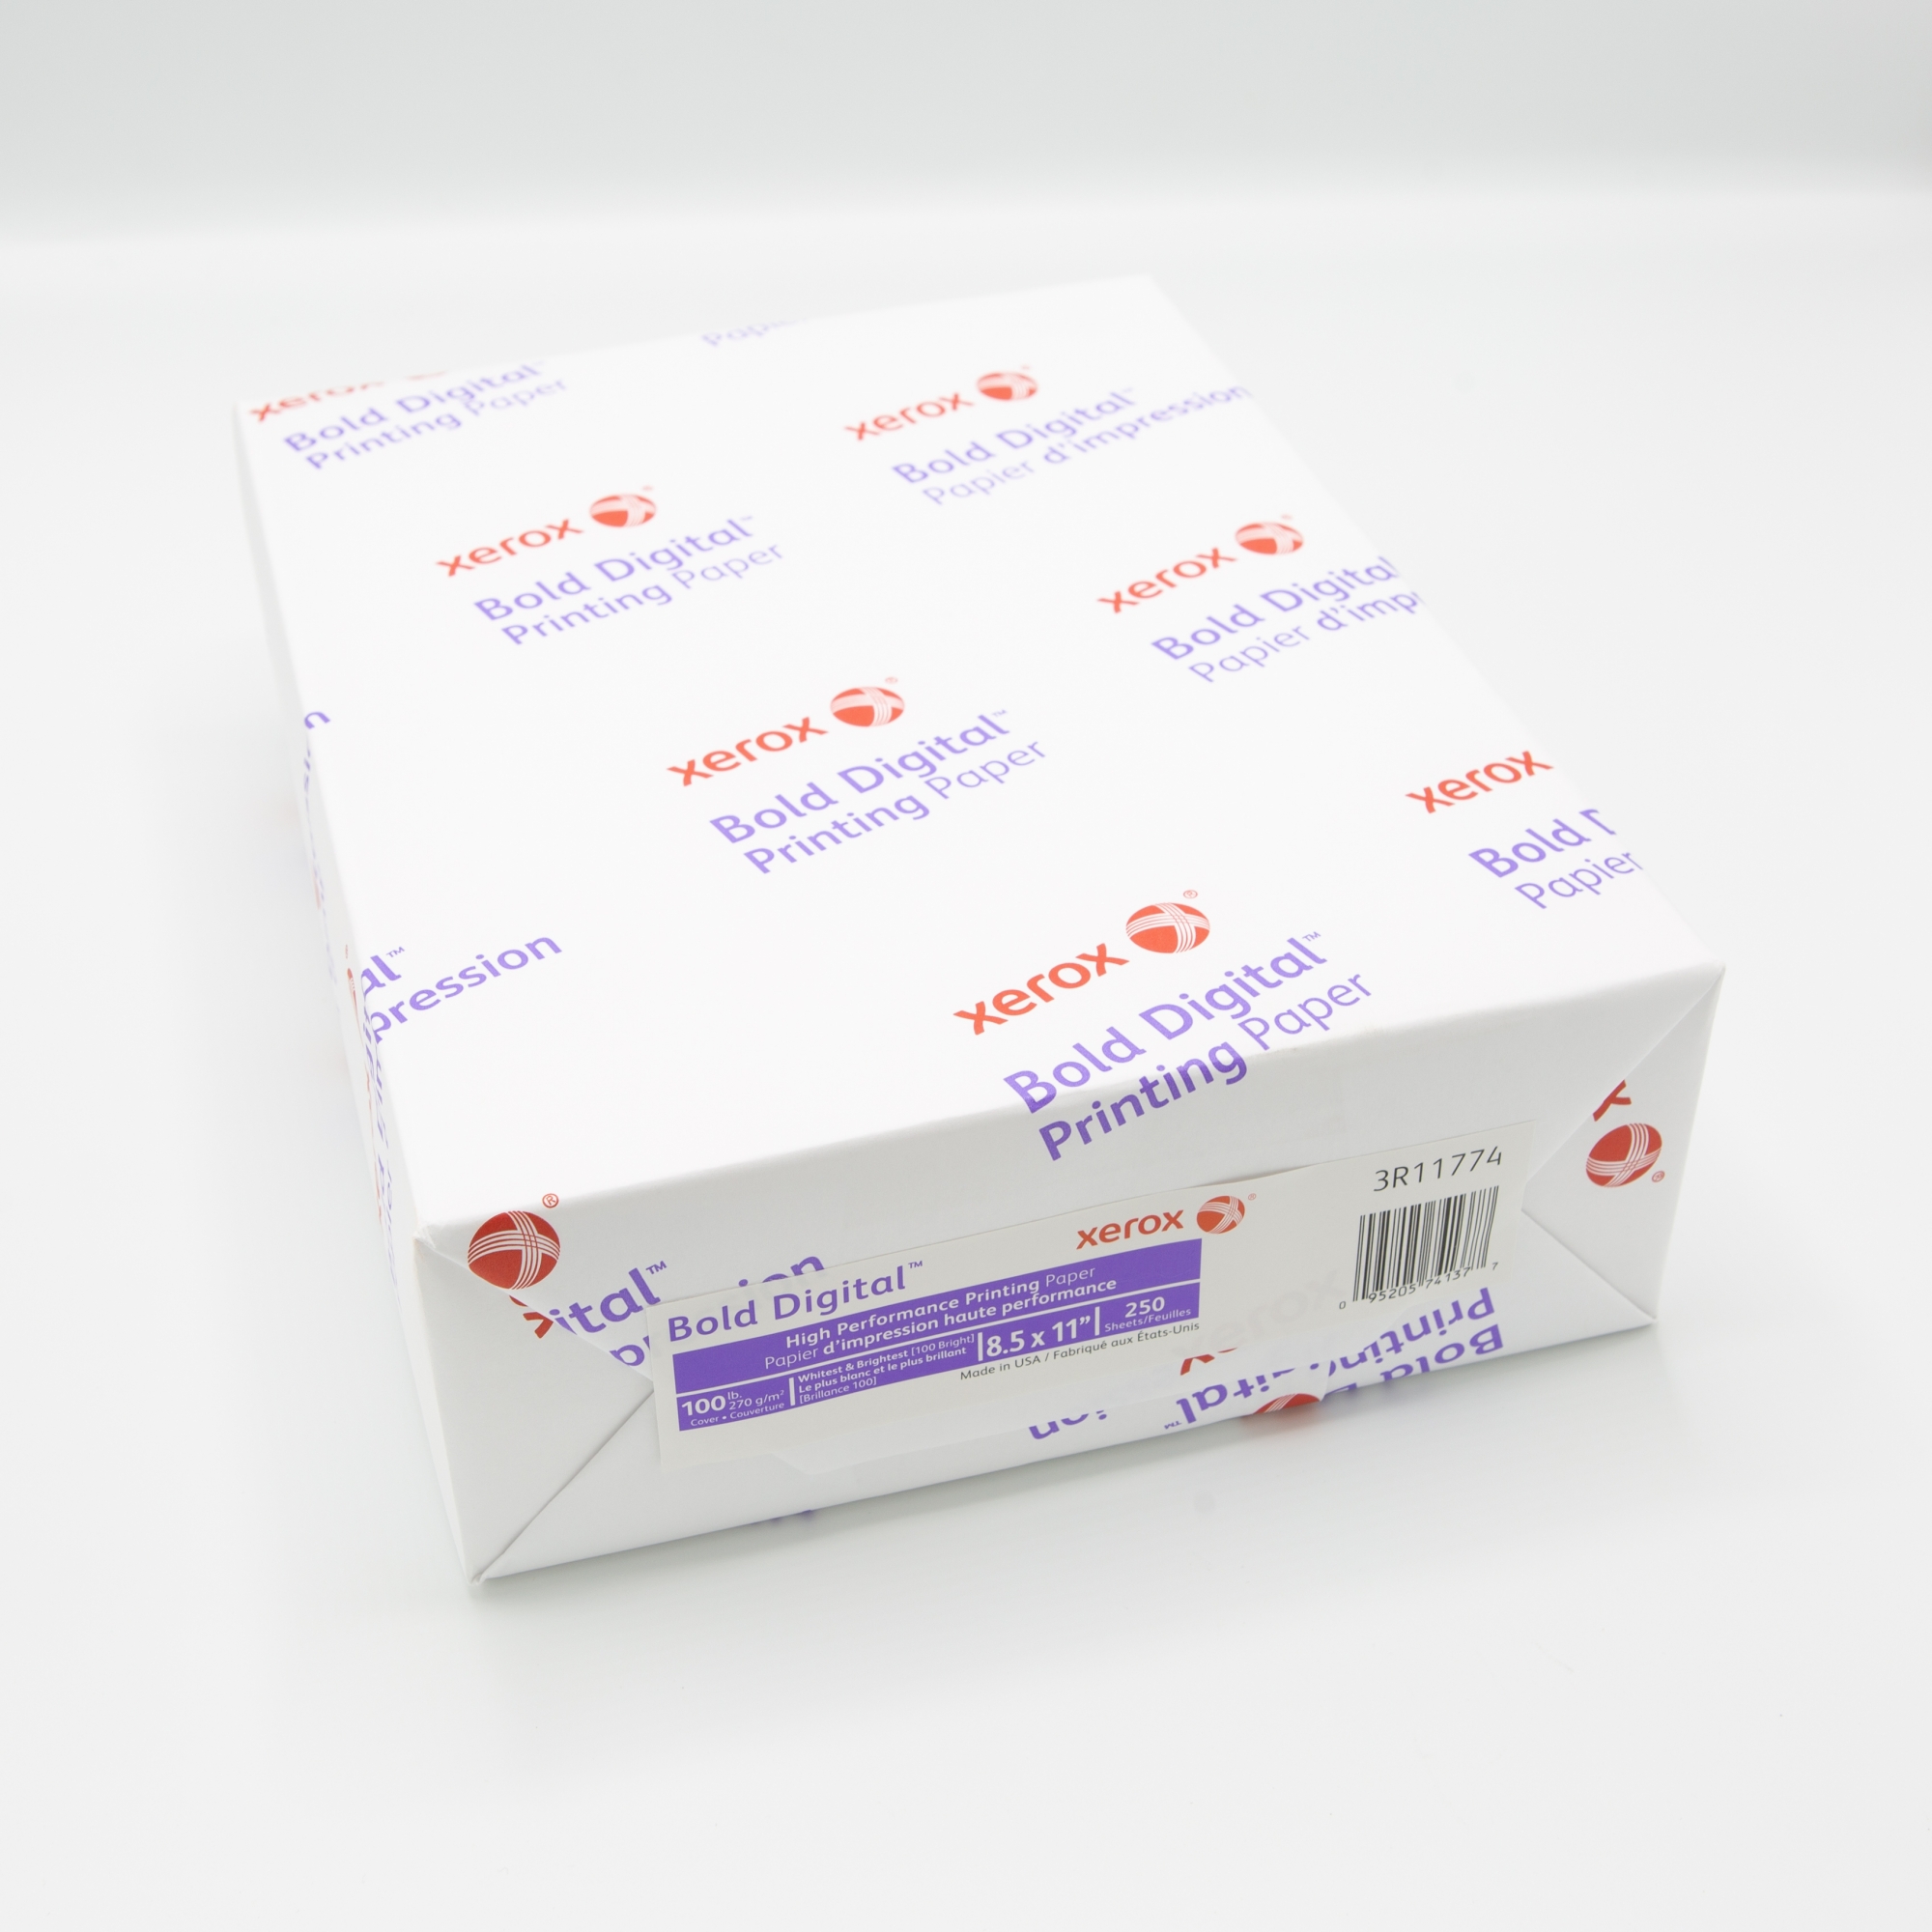 Xerox Bold Hi-Performance Uncoated Cardstock White 100-Bright! Ultra Smooth  100 lb. Cover 36M 8.5 x 11 FSC Certified, Ream of 250 Sheets